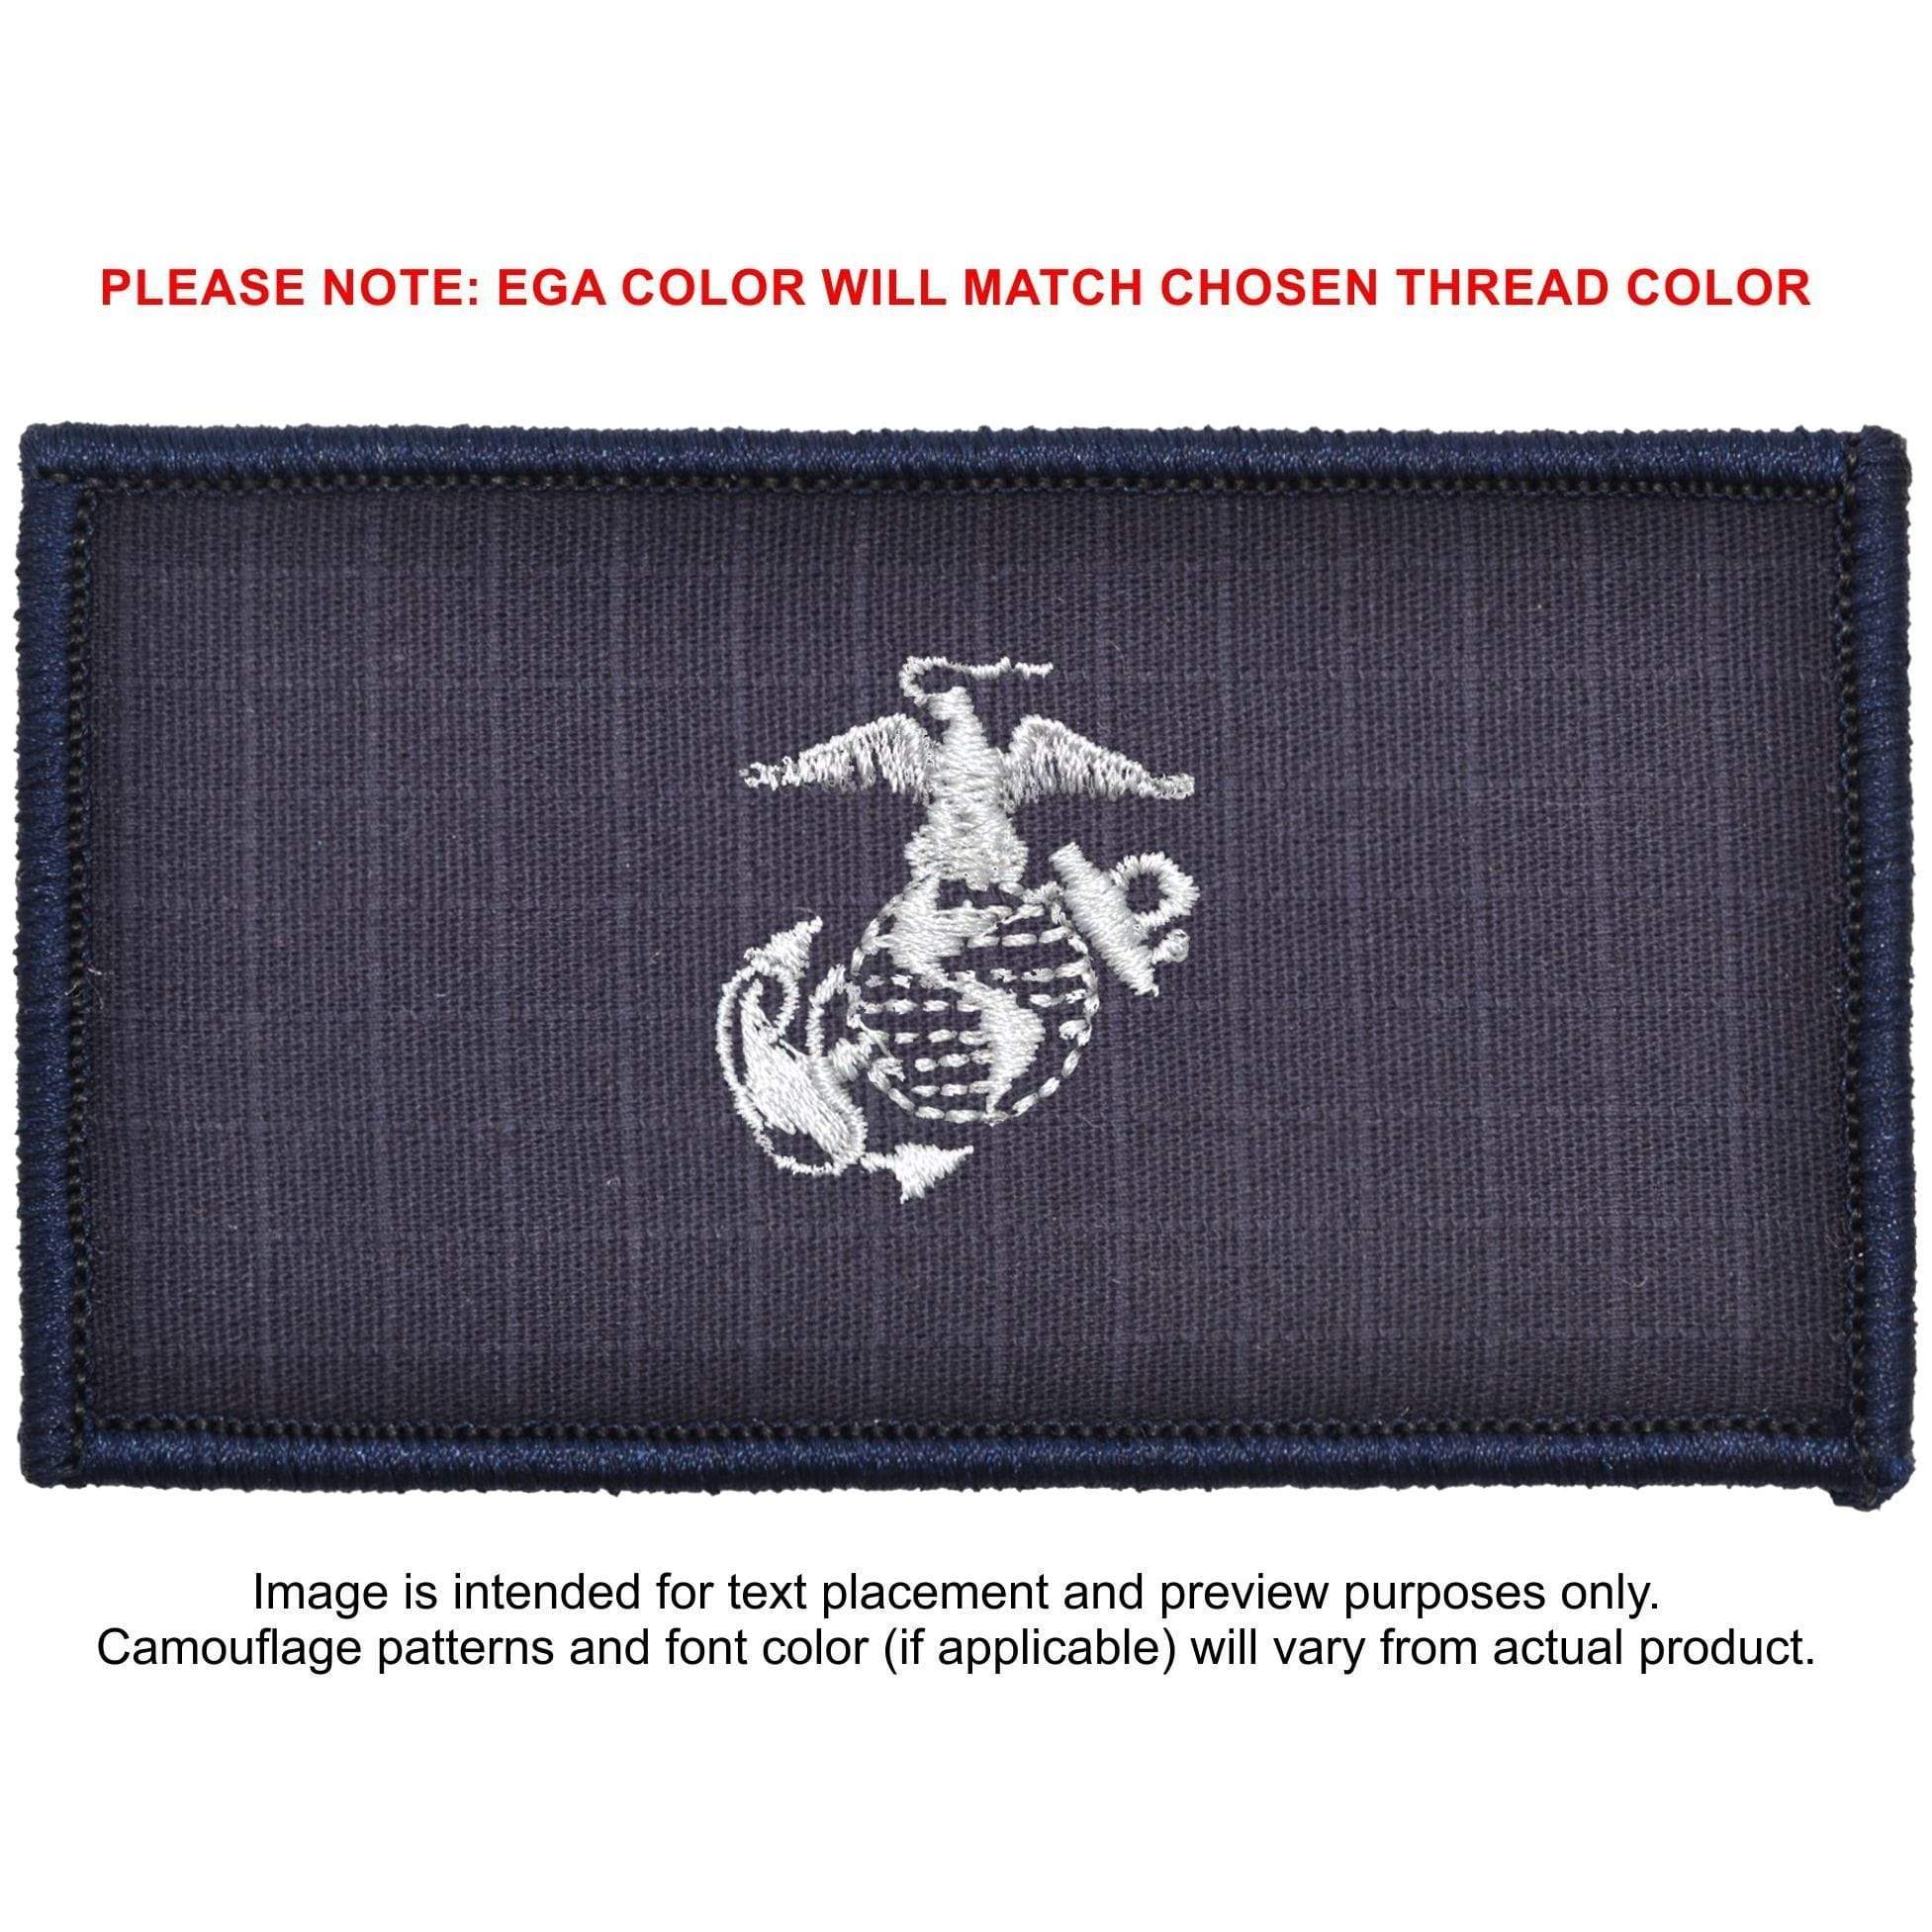 Tactical Gear Junkie Patches Navy Blue USMC Plate Carrier Flak Patch - Eagle Globe and Anchor Graphic (Open Globe)